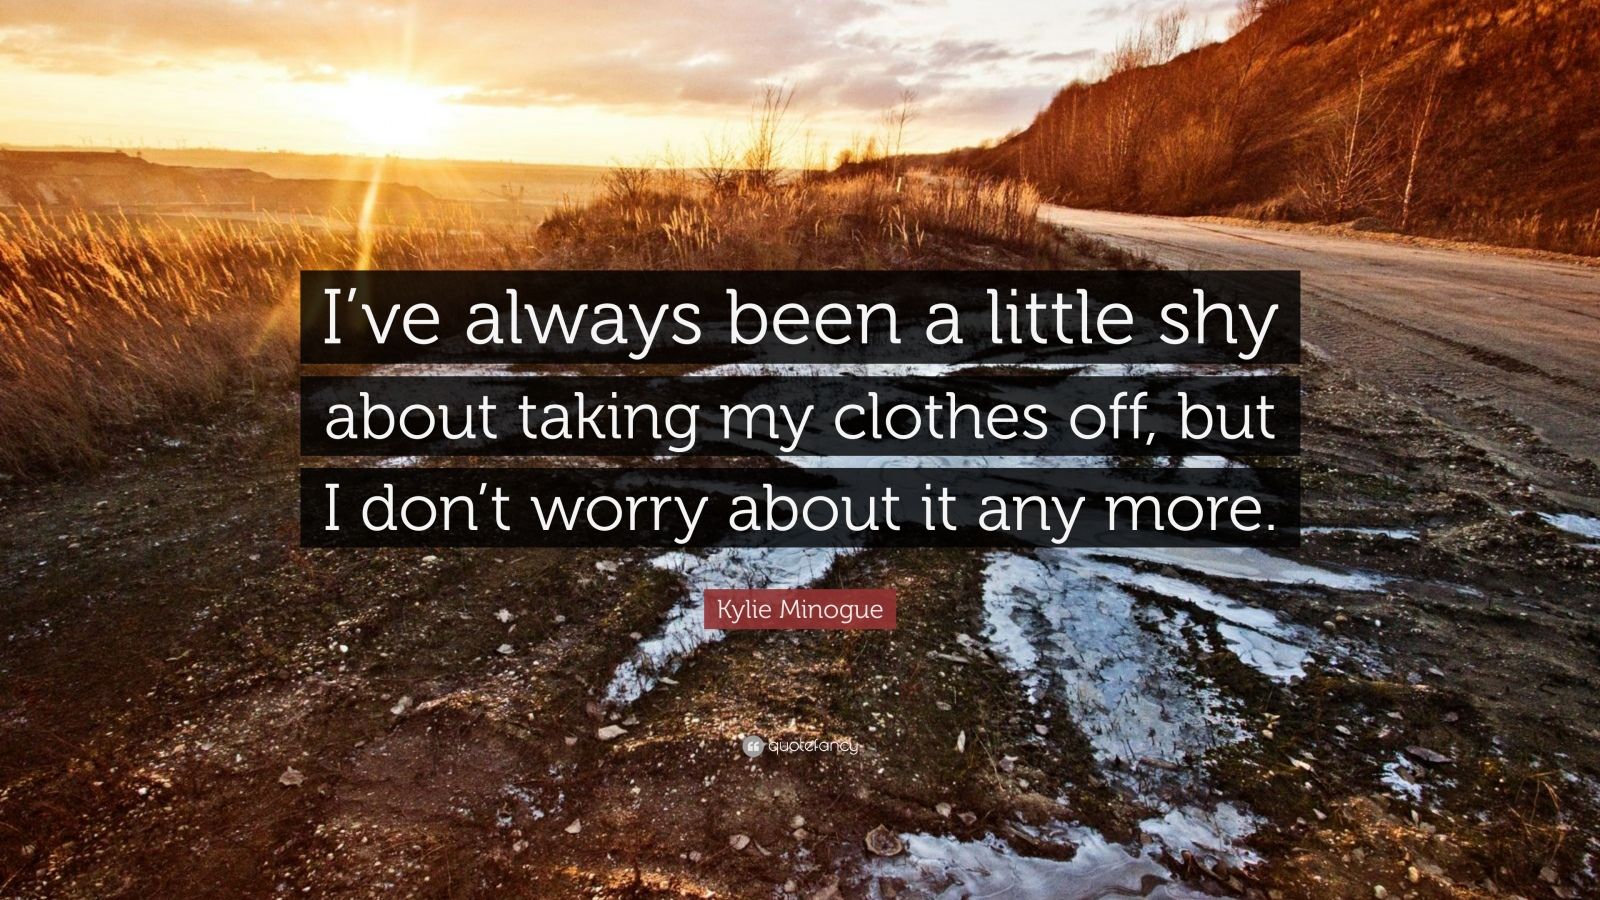 Kylie Minogue Quote I Ve Always Been A Little Shy About Taking My Clothes Off But I Don T Worry About It Any More